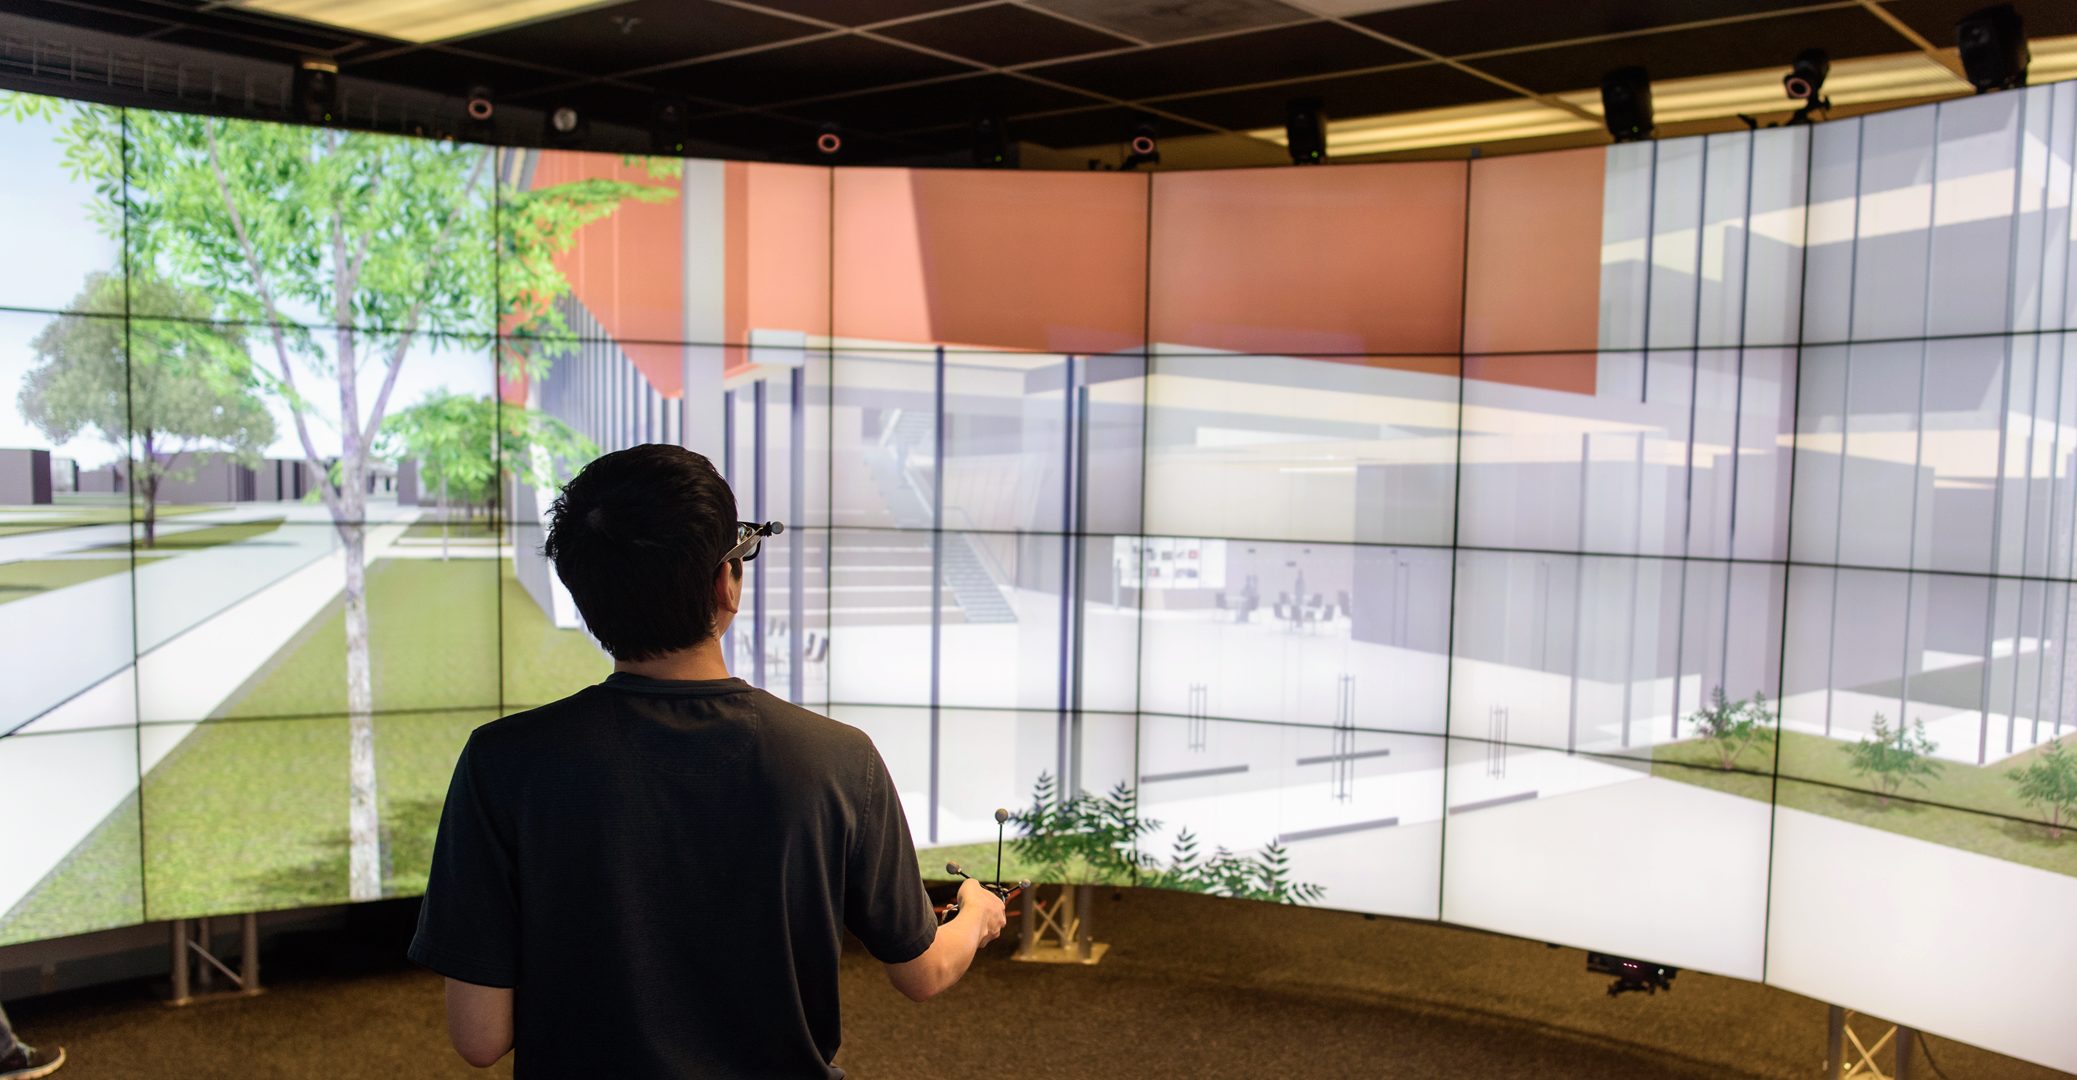 EVL PhD candidate Arthur Nishimoto navigates through the proposed virtual COE building in the CAVE2.